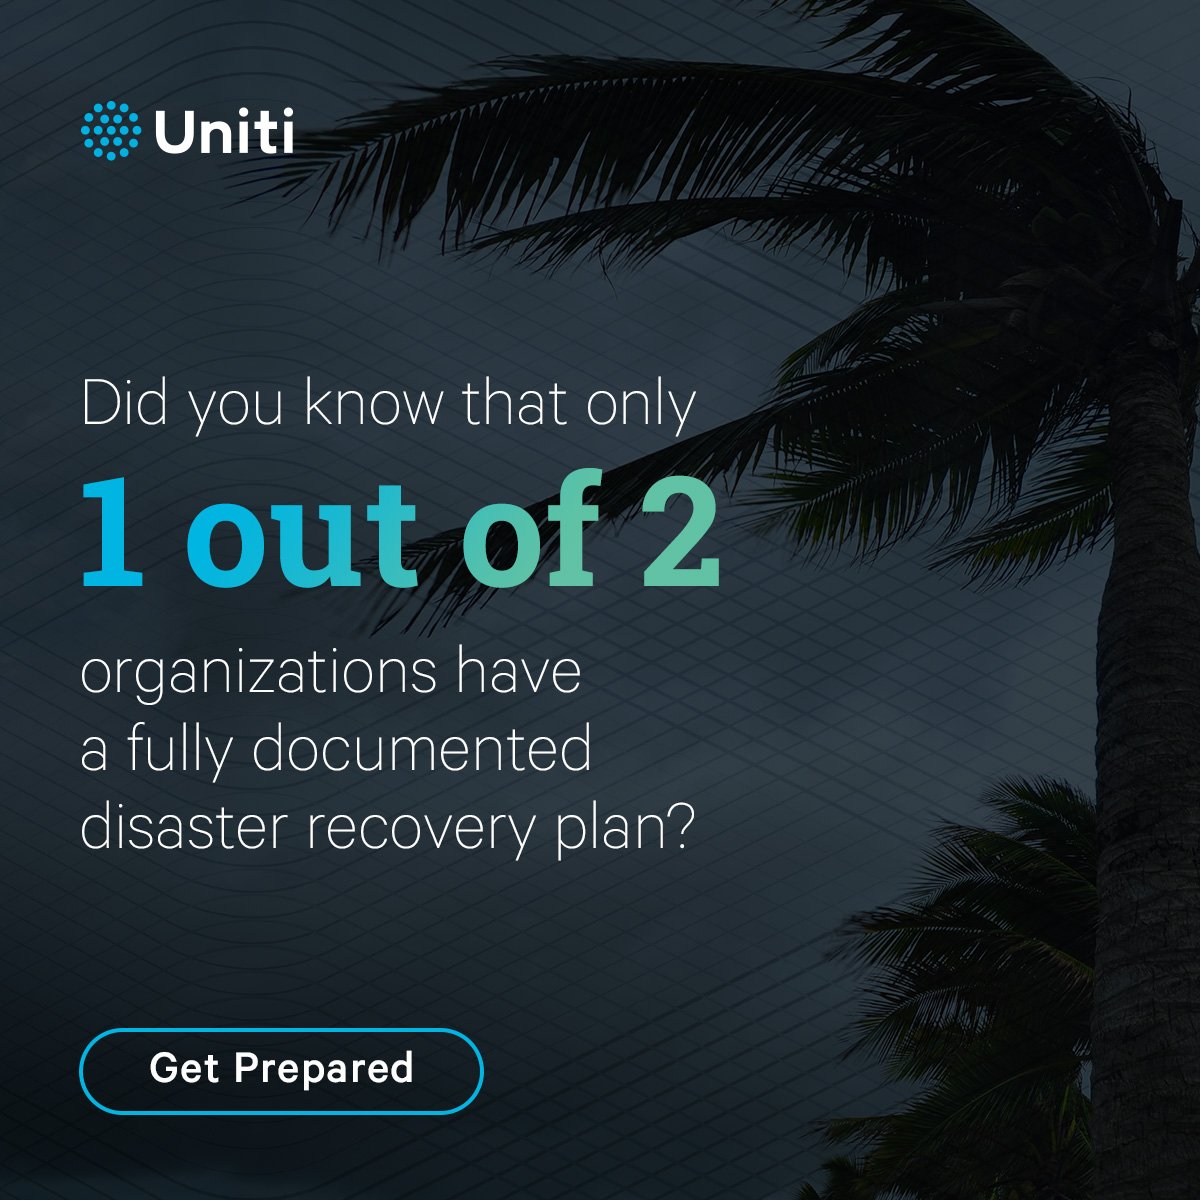 Concerned your business isn't ready for the next hurricane? You're not alone. Let us help. Schedule a 30-minute (free!) Disaster Recovery Assessment with one of our experts. Get started here! #disasterrecovery #stormpreparedness #networkresiliency bit.ly/4a2CHfR